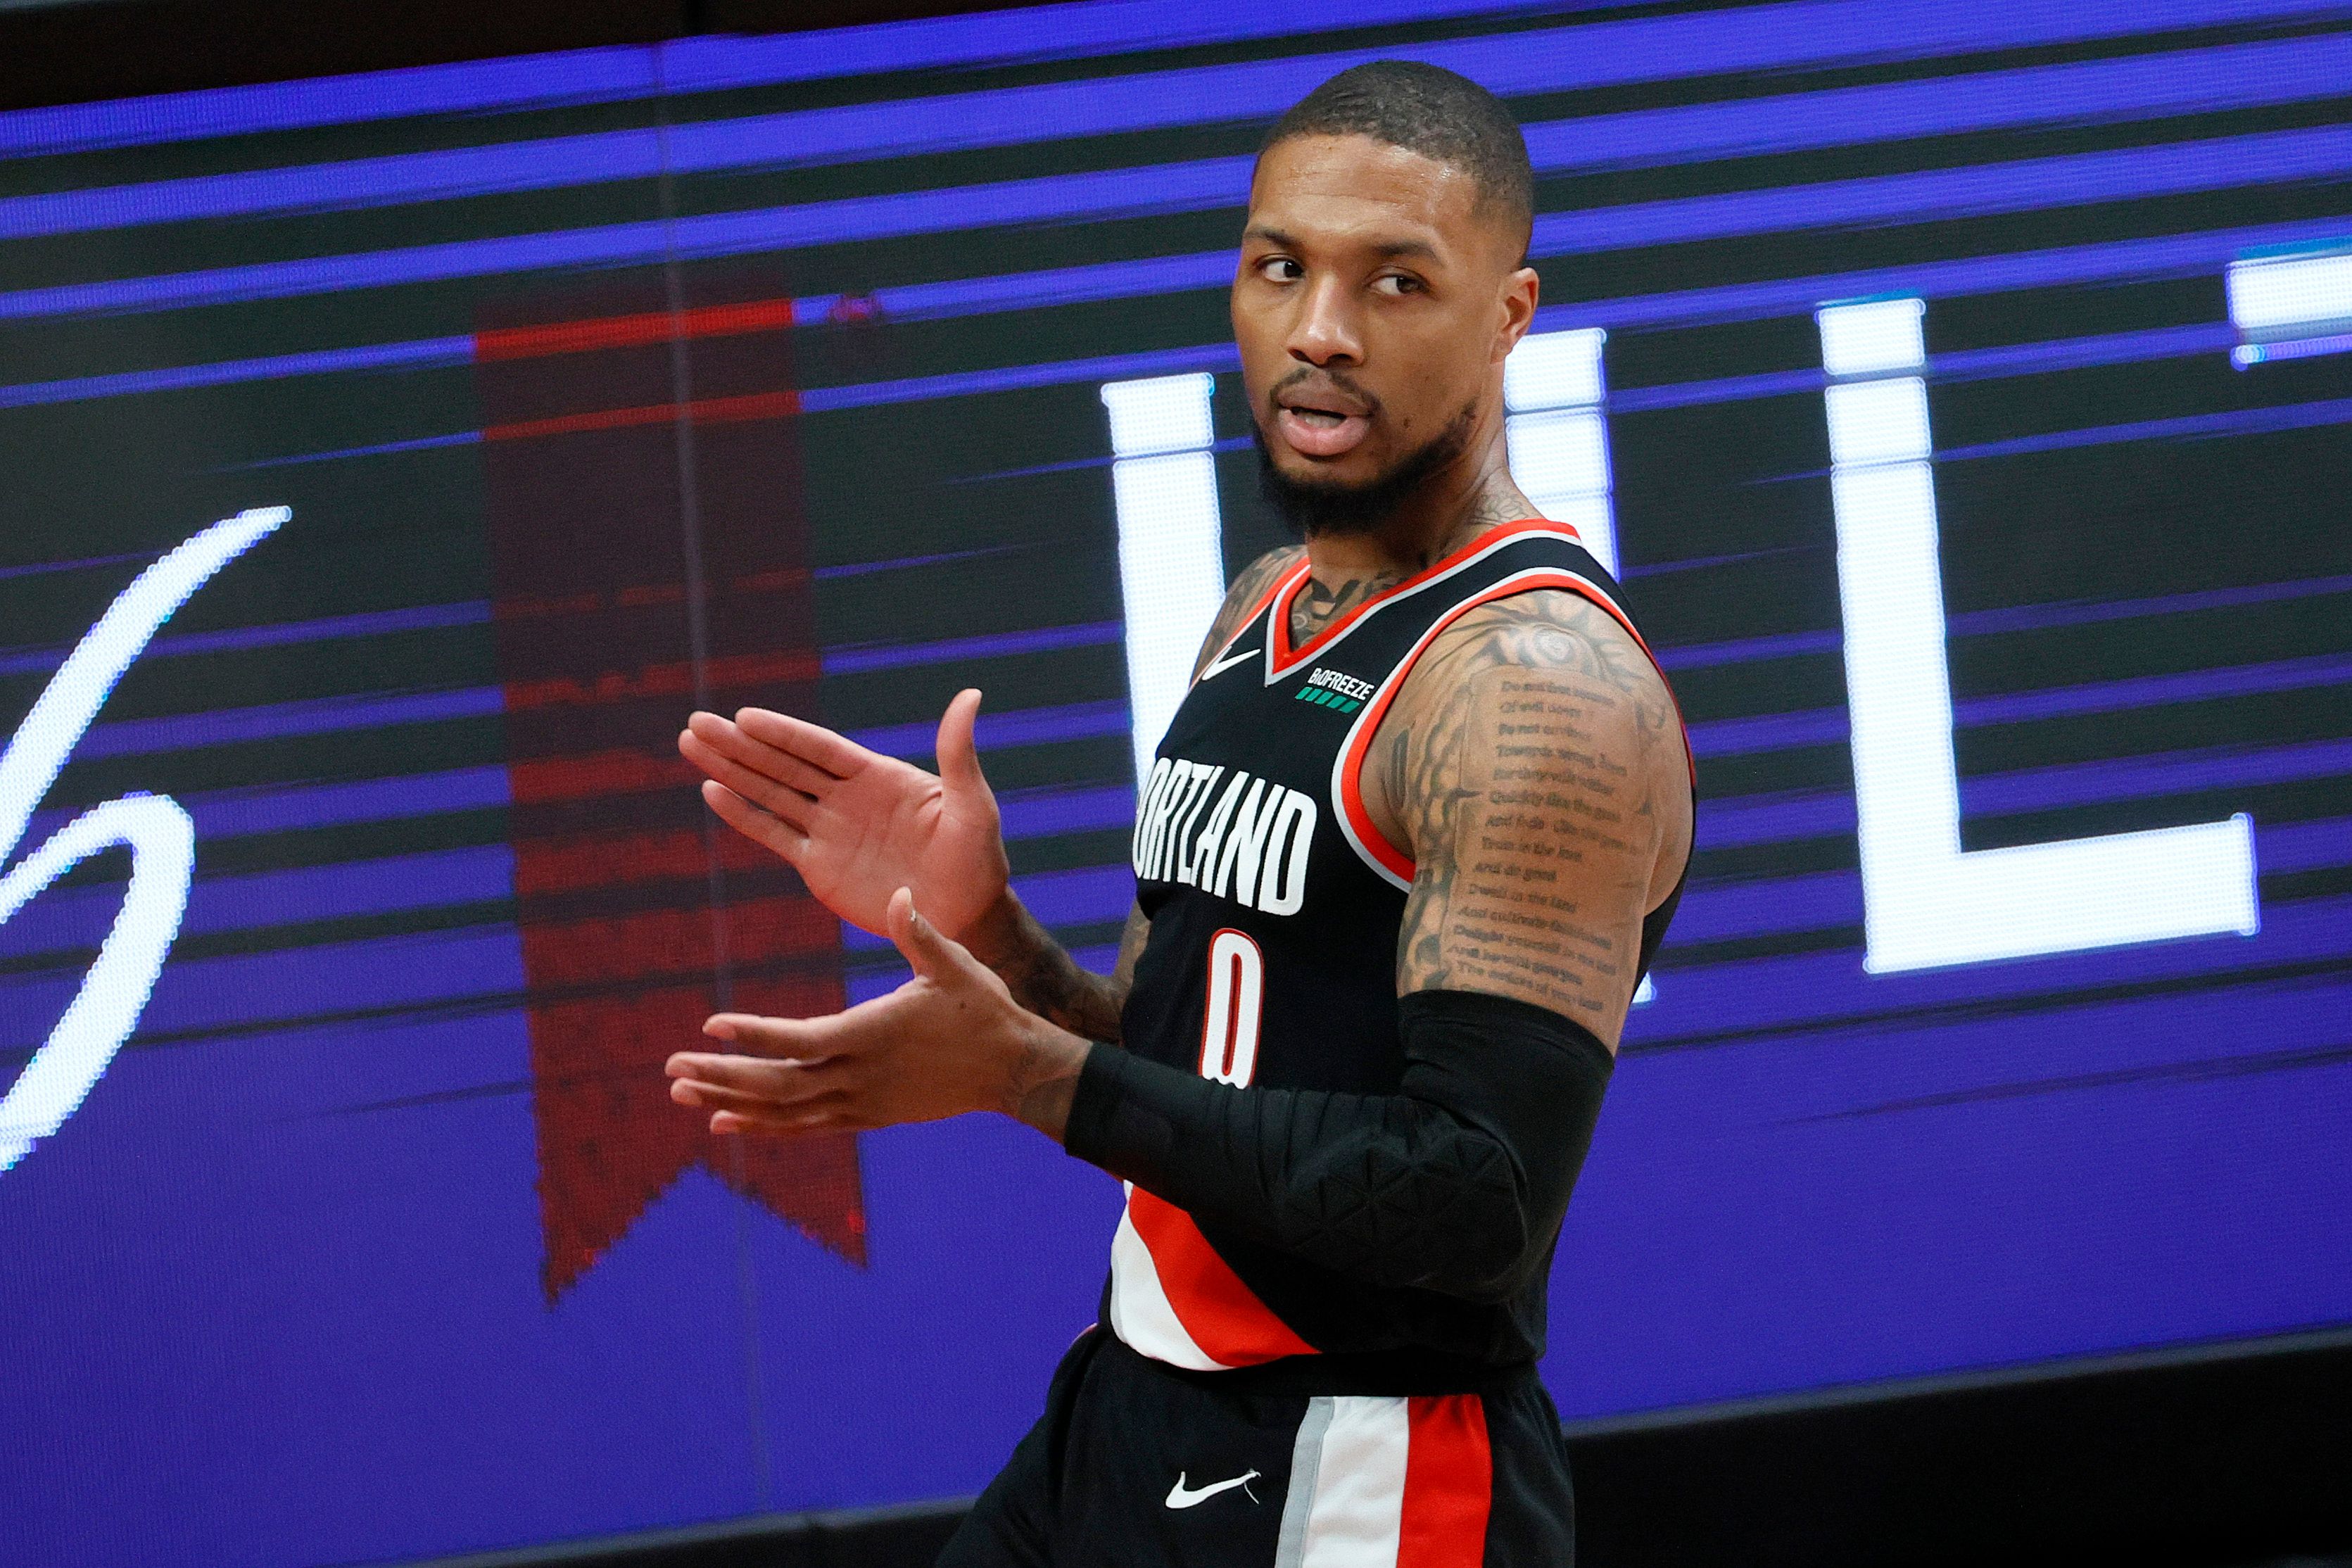 Damian Lillard clapping his hands after receiving a favorable call